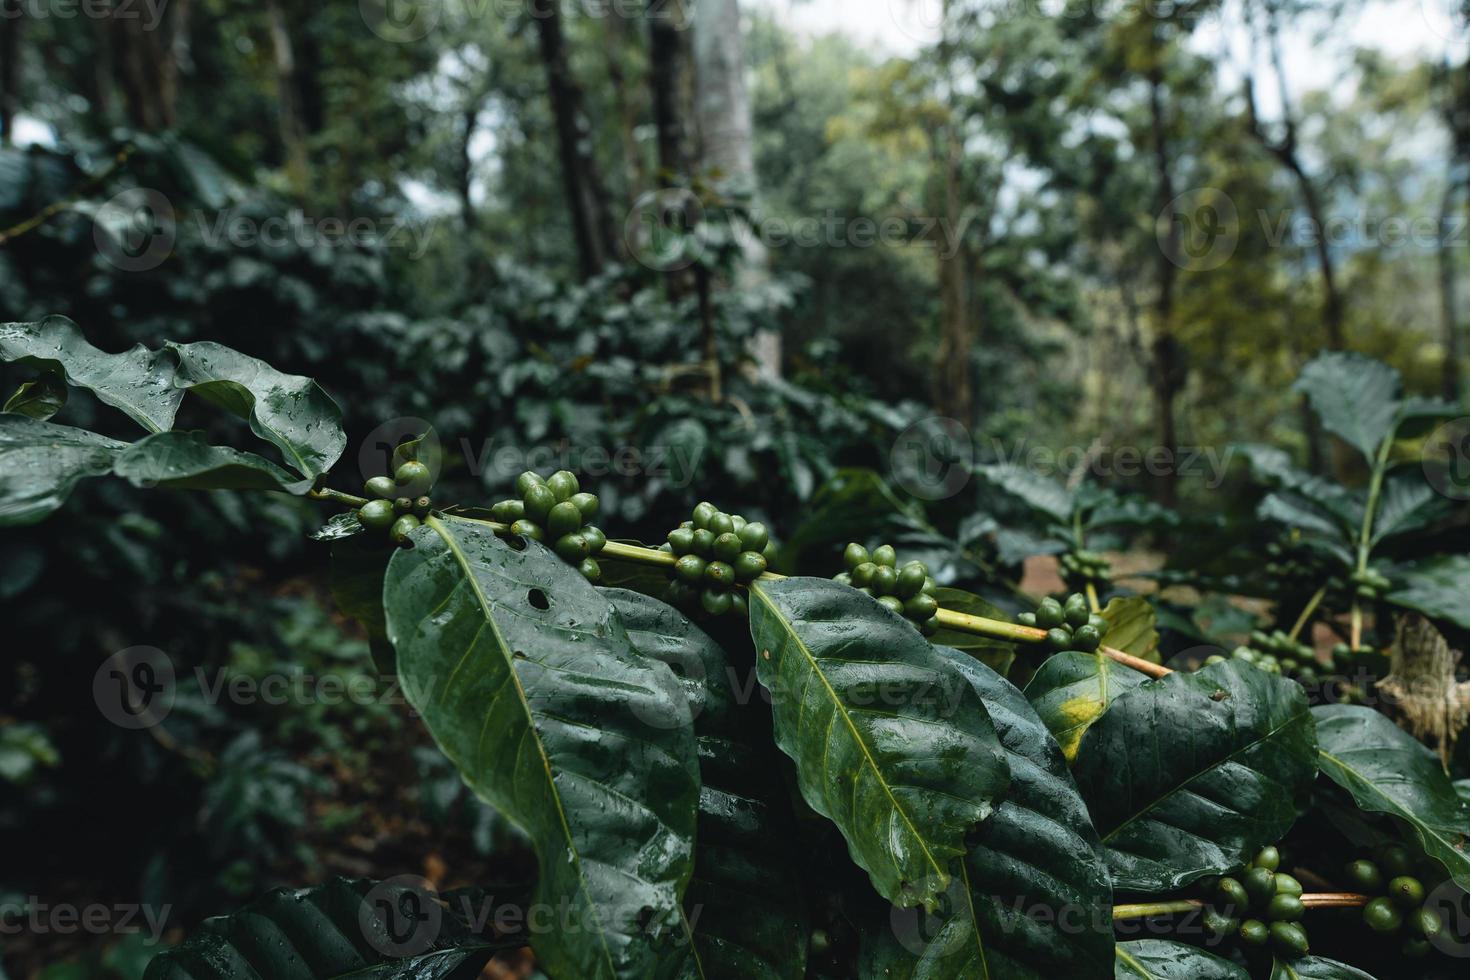 coffee plantation in tropical forest photo